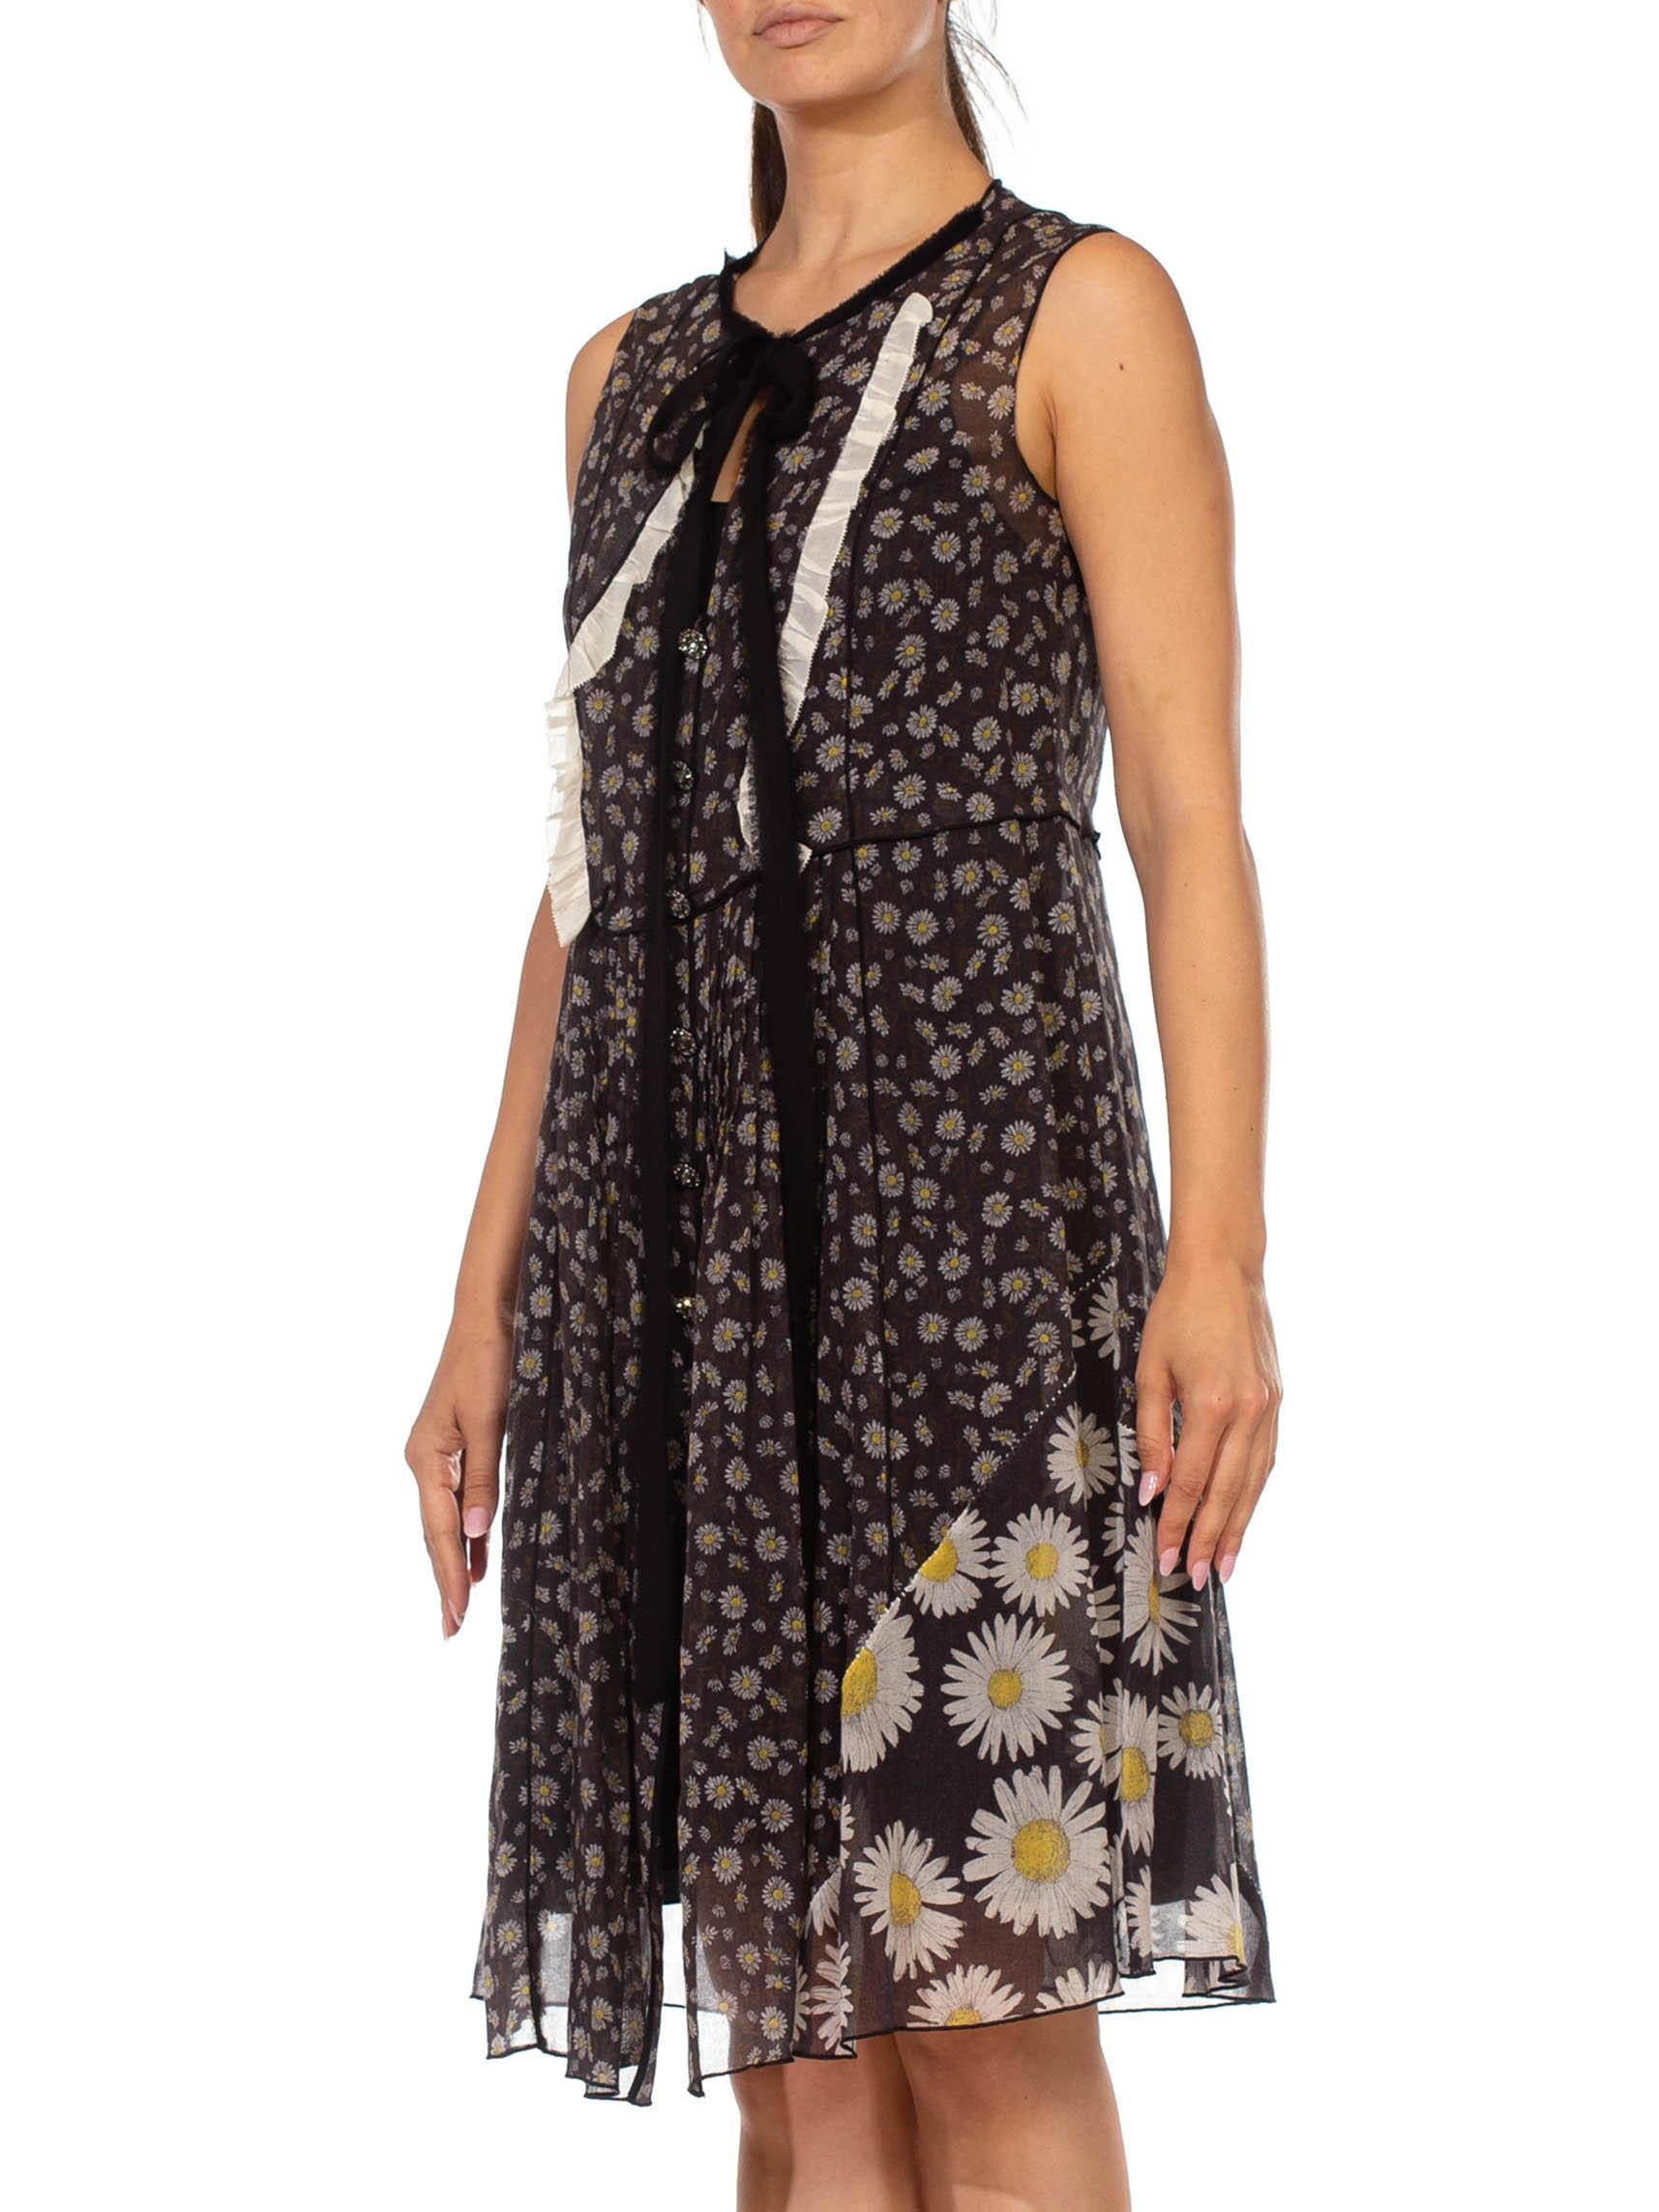 1990S MARC JACOBS Black Daisy Print Cotton Dress With Patchwork And Ruffle Deta In Excellent Condition For Sale In New York, NY